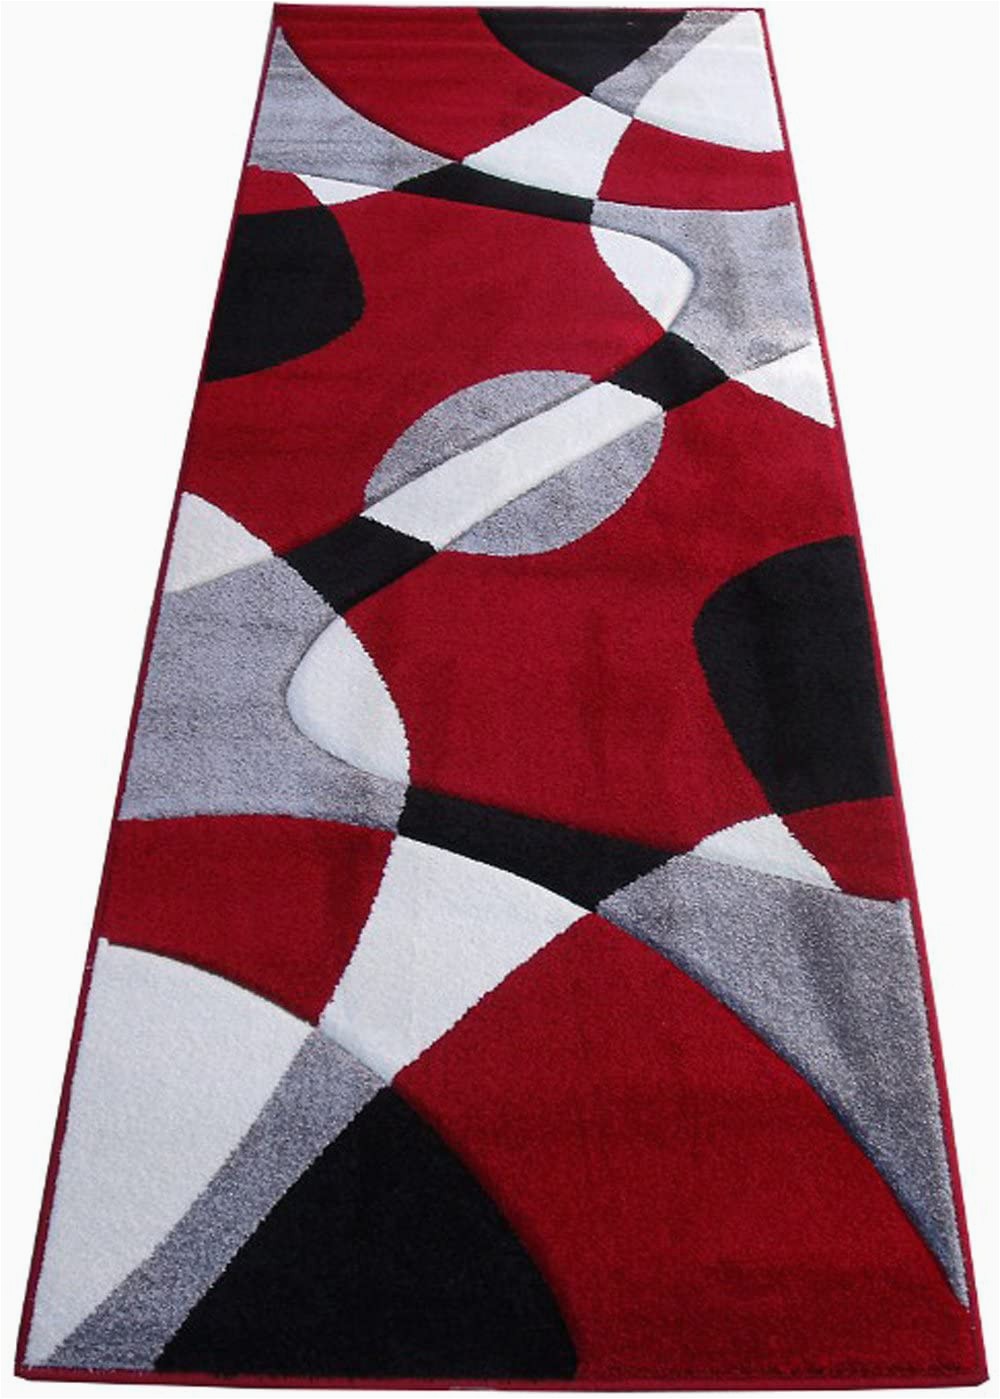 Red Black White area Rug Prestige Persian Runner Red White Black Gray 3×8 area Rug New Actual Size 2 7 X 7 4